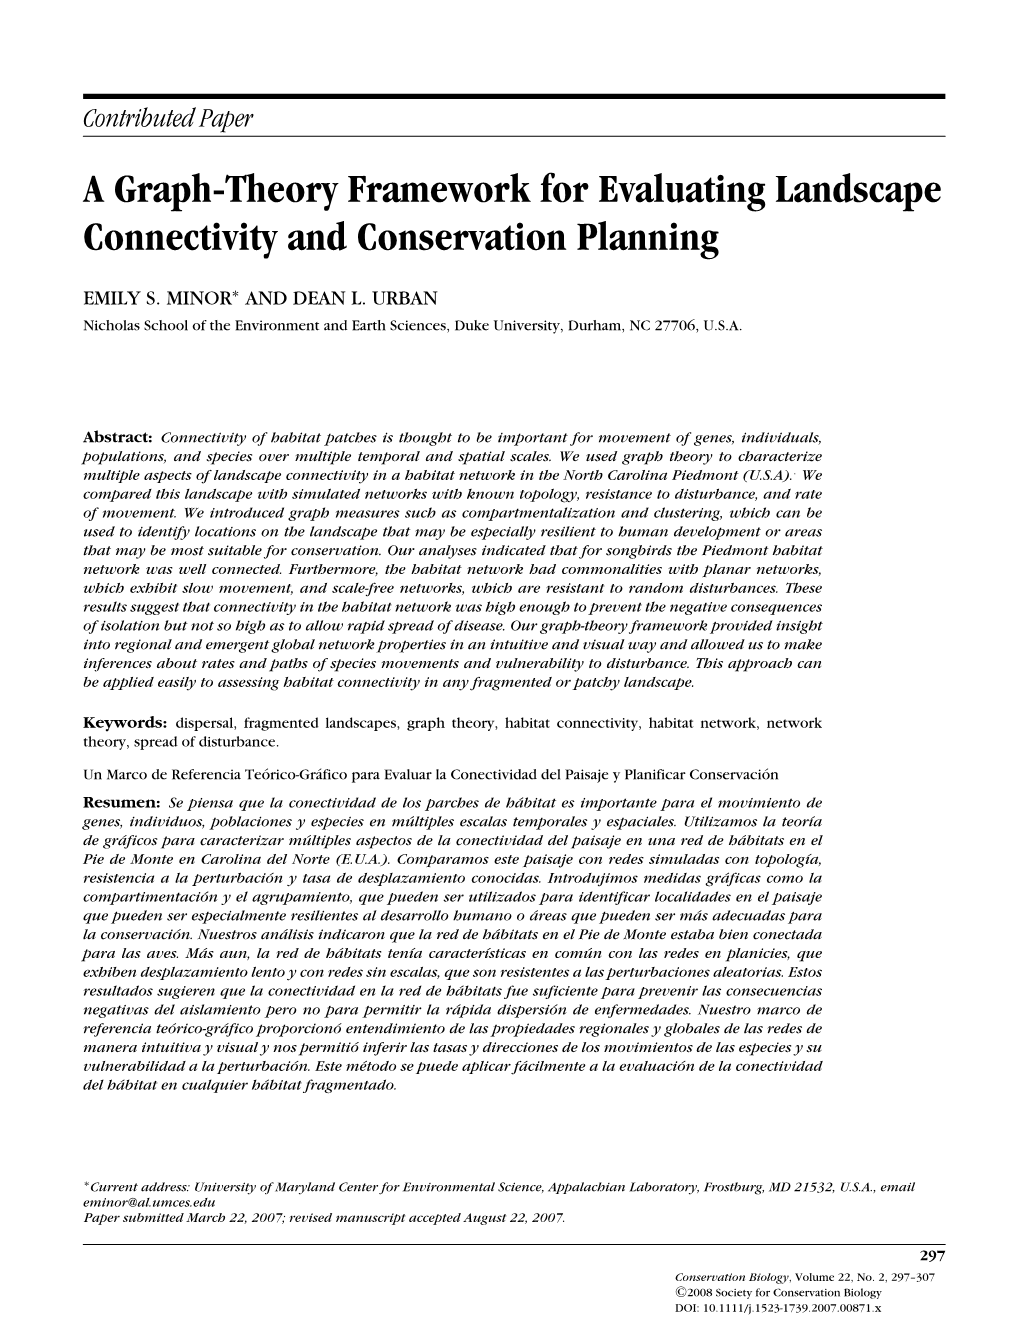 A Graph-Theory Framework for Evaluating Landscape Connectivity and Conservation Planning